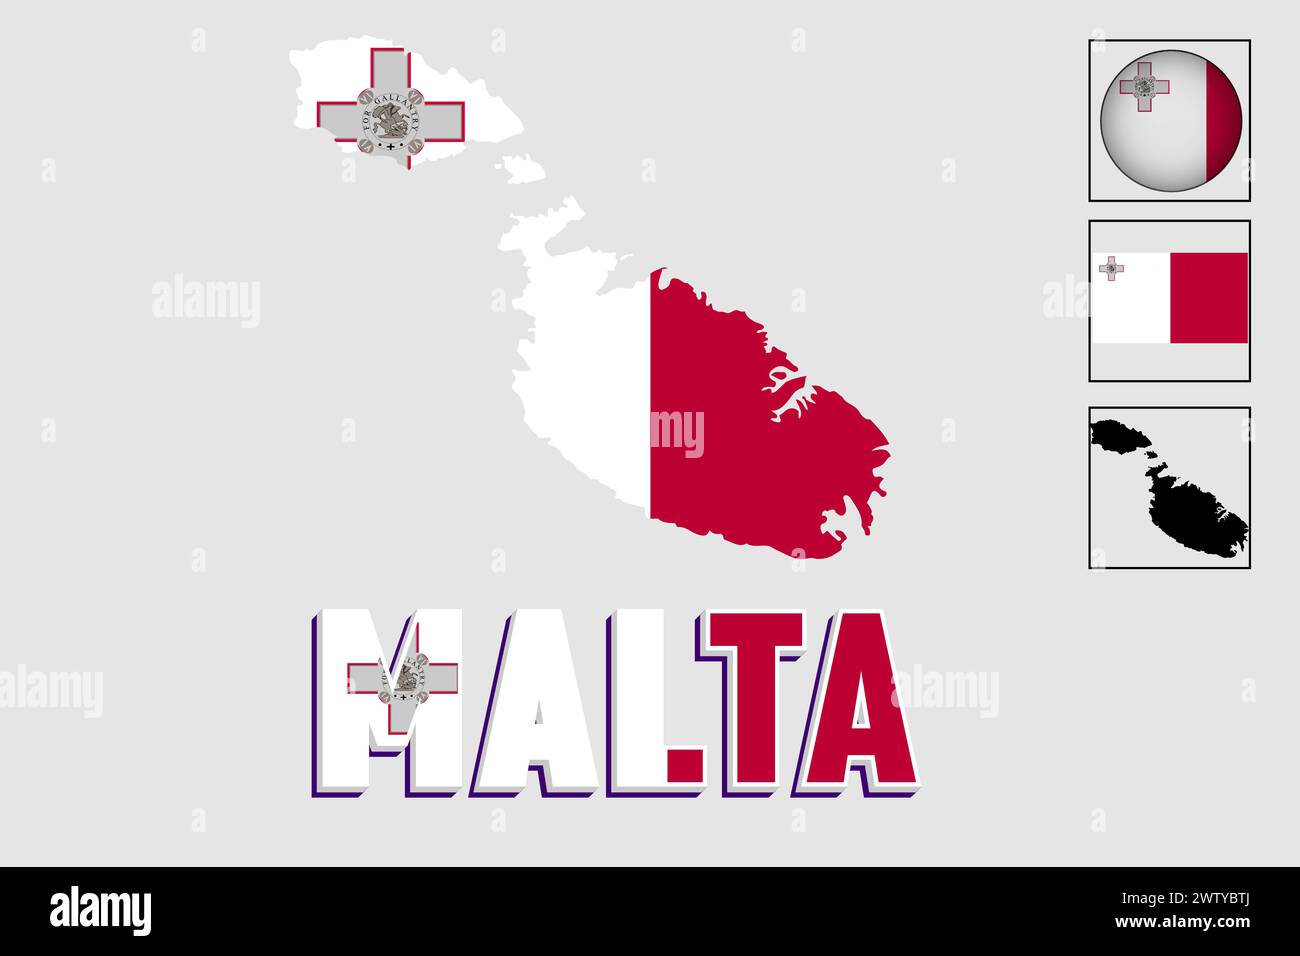 Malta flag and map in a vector graphic Stock Vector